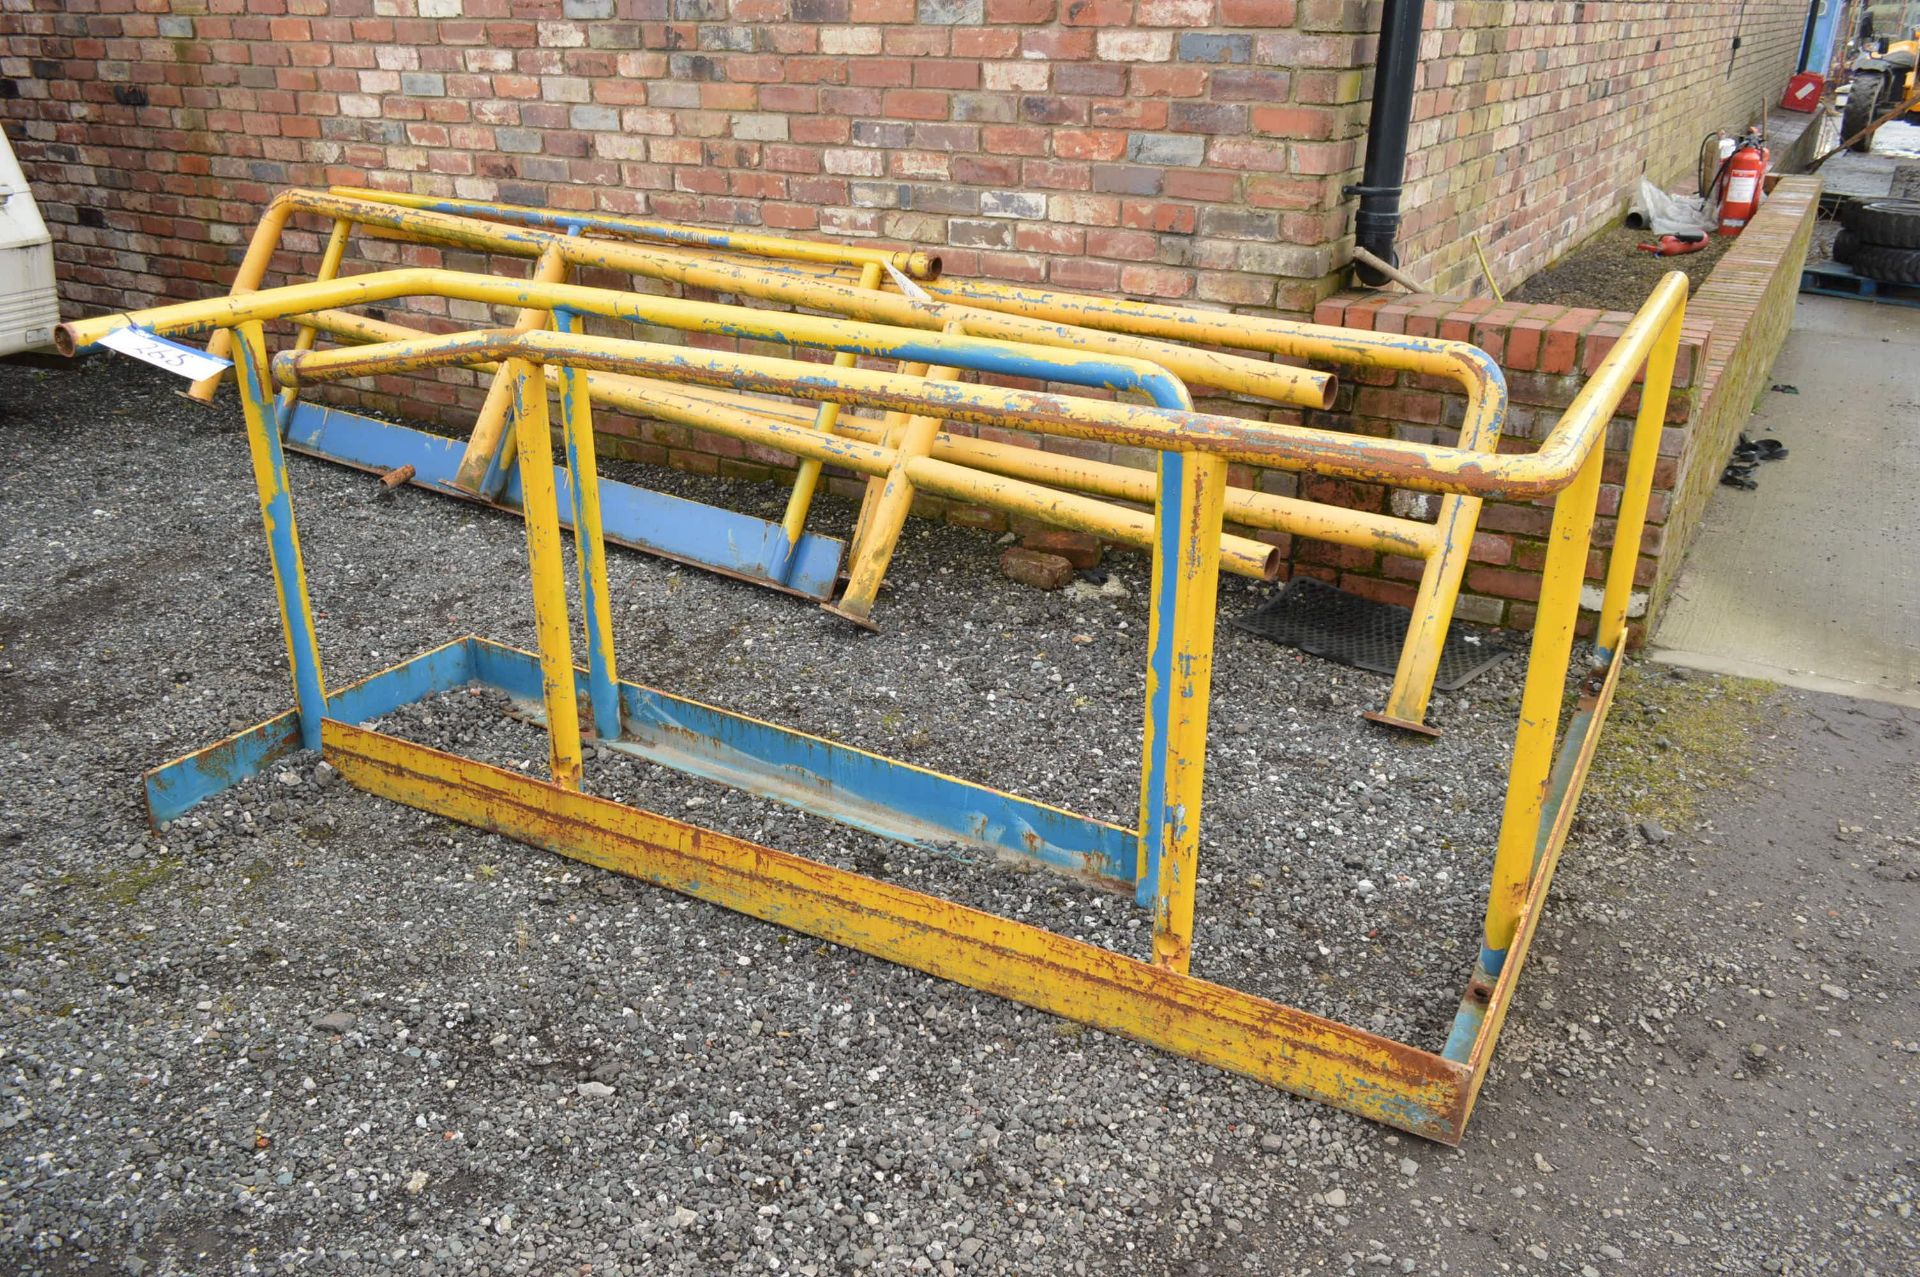 Two L-shaped Tubular Steel Barriers